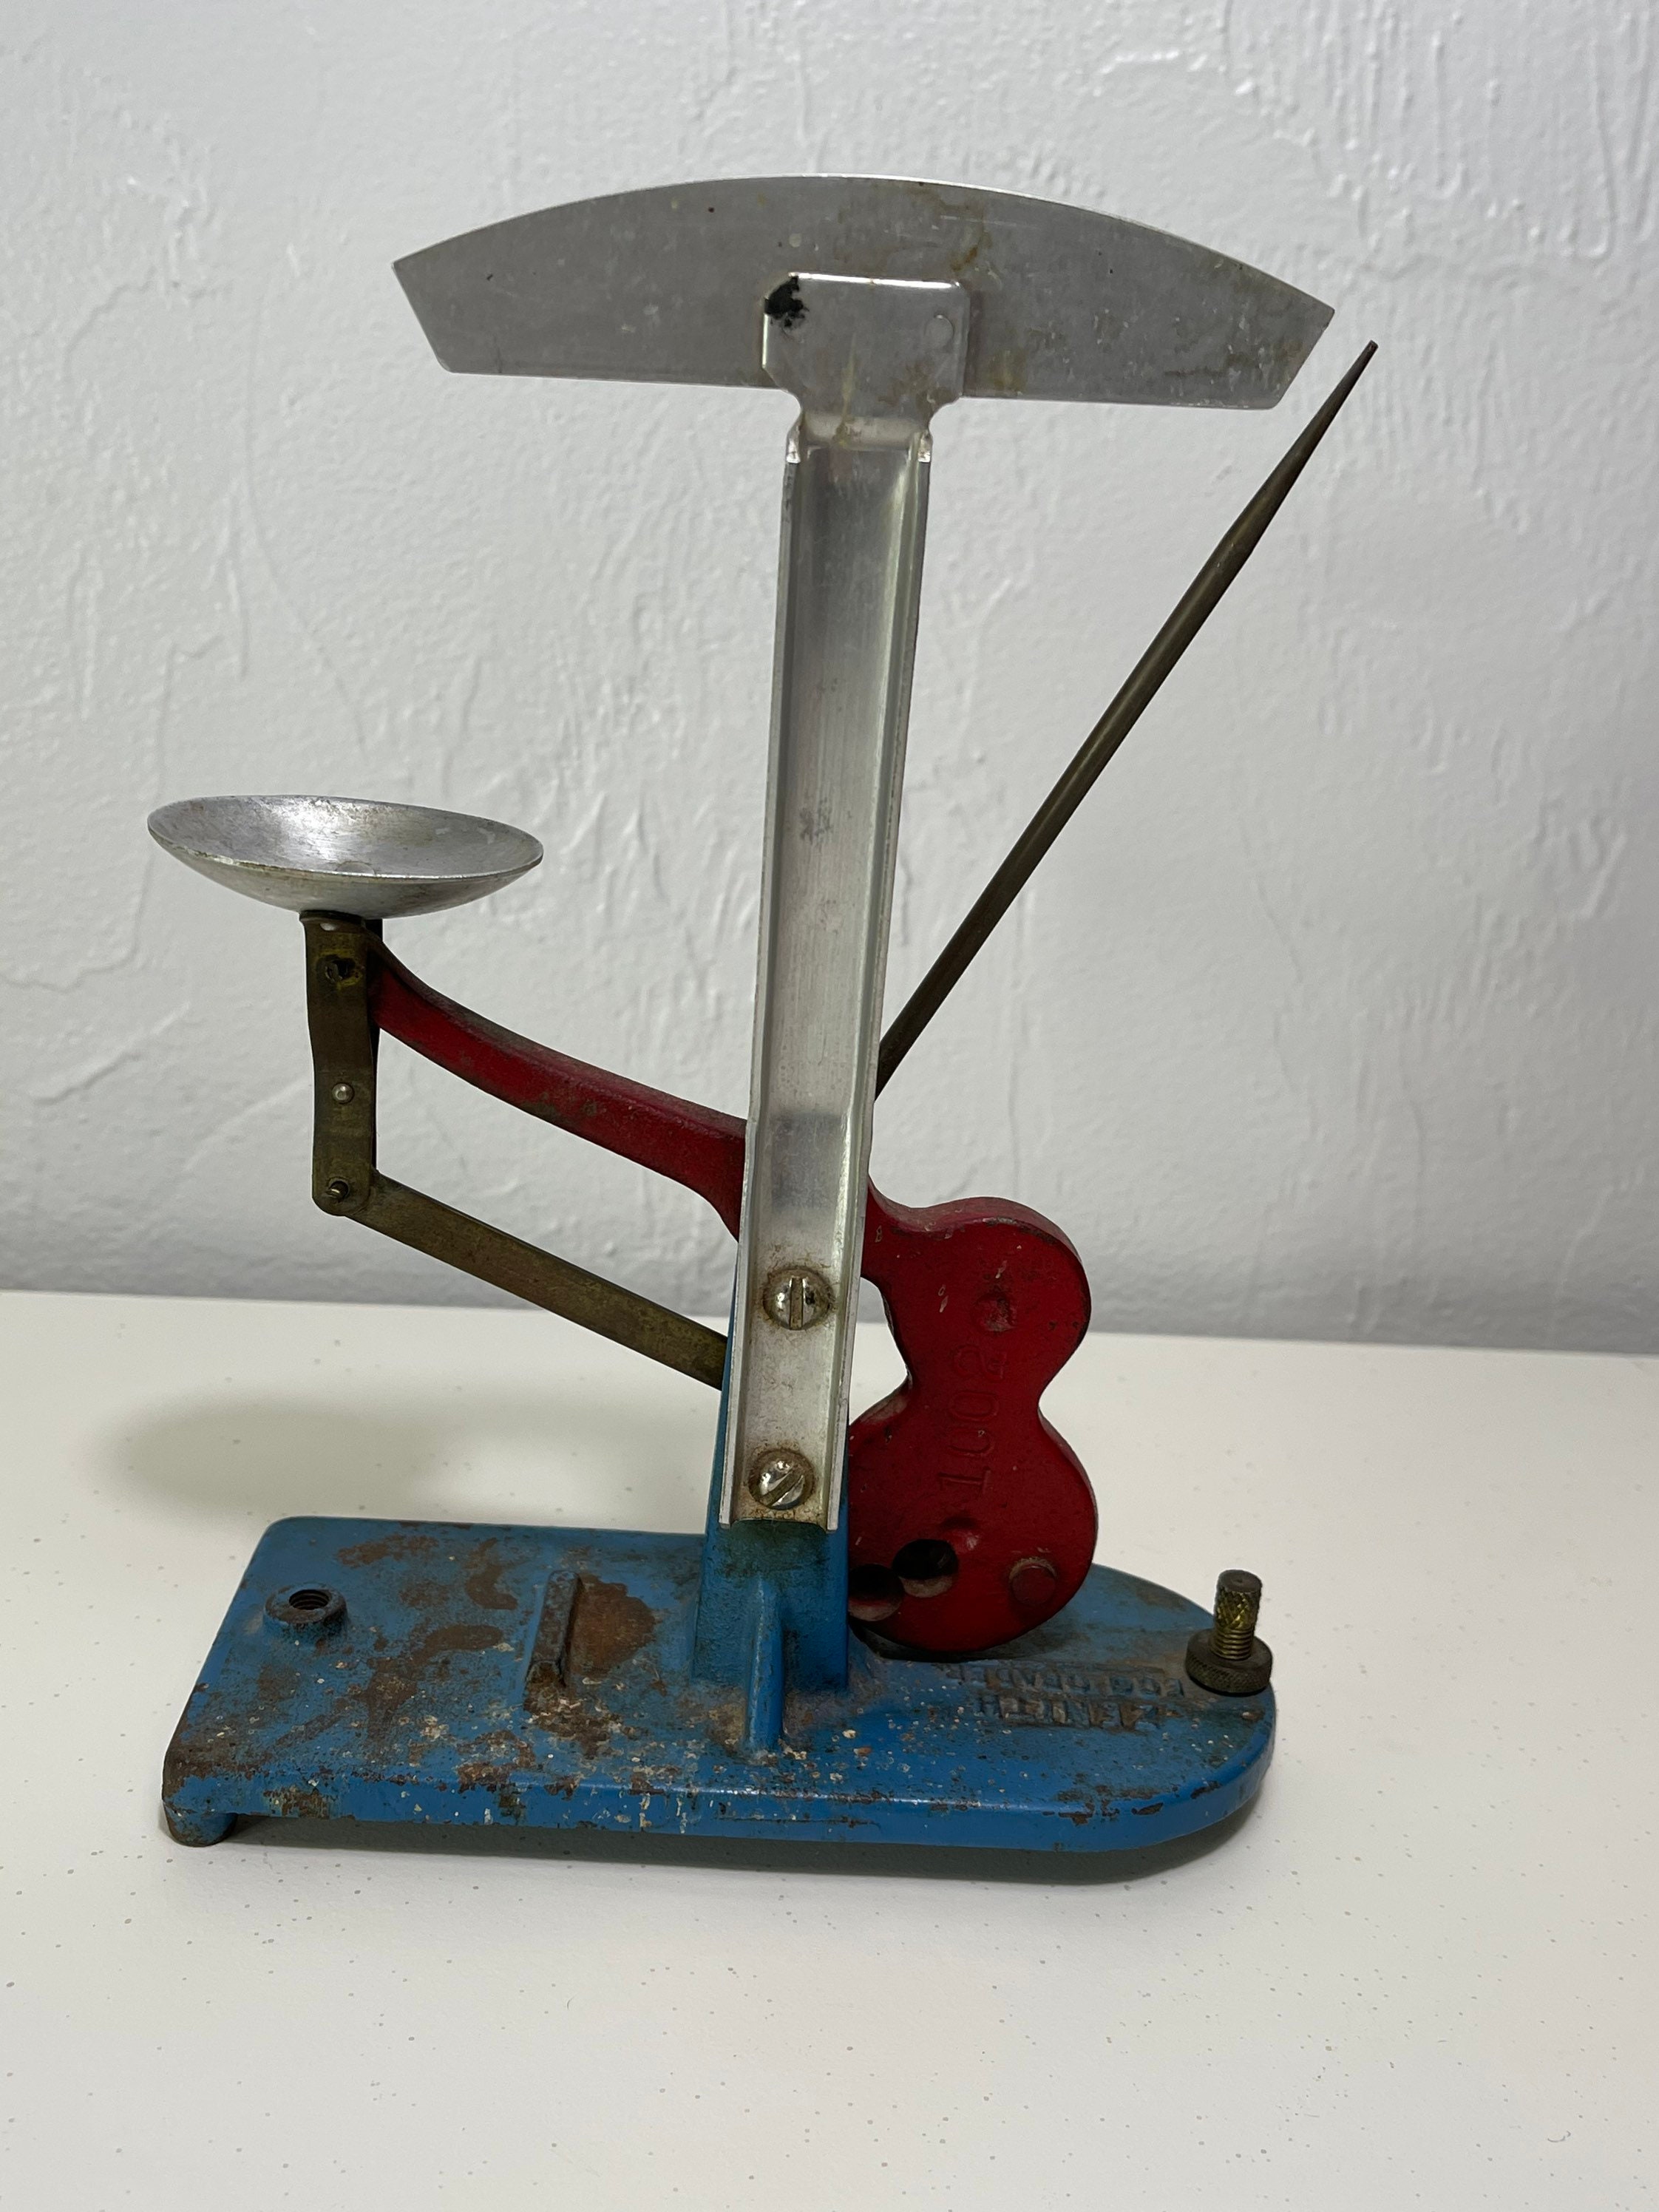 Scale / Jiffy Way Egg Scale 